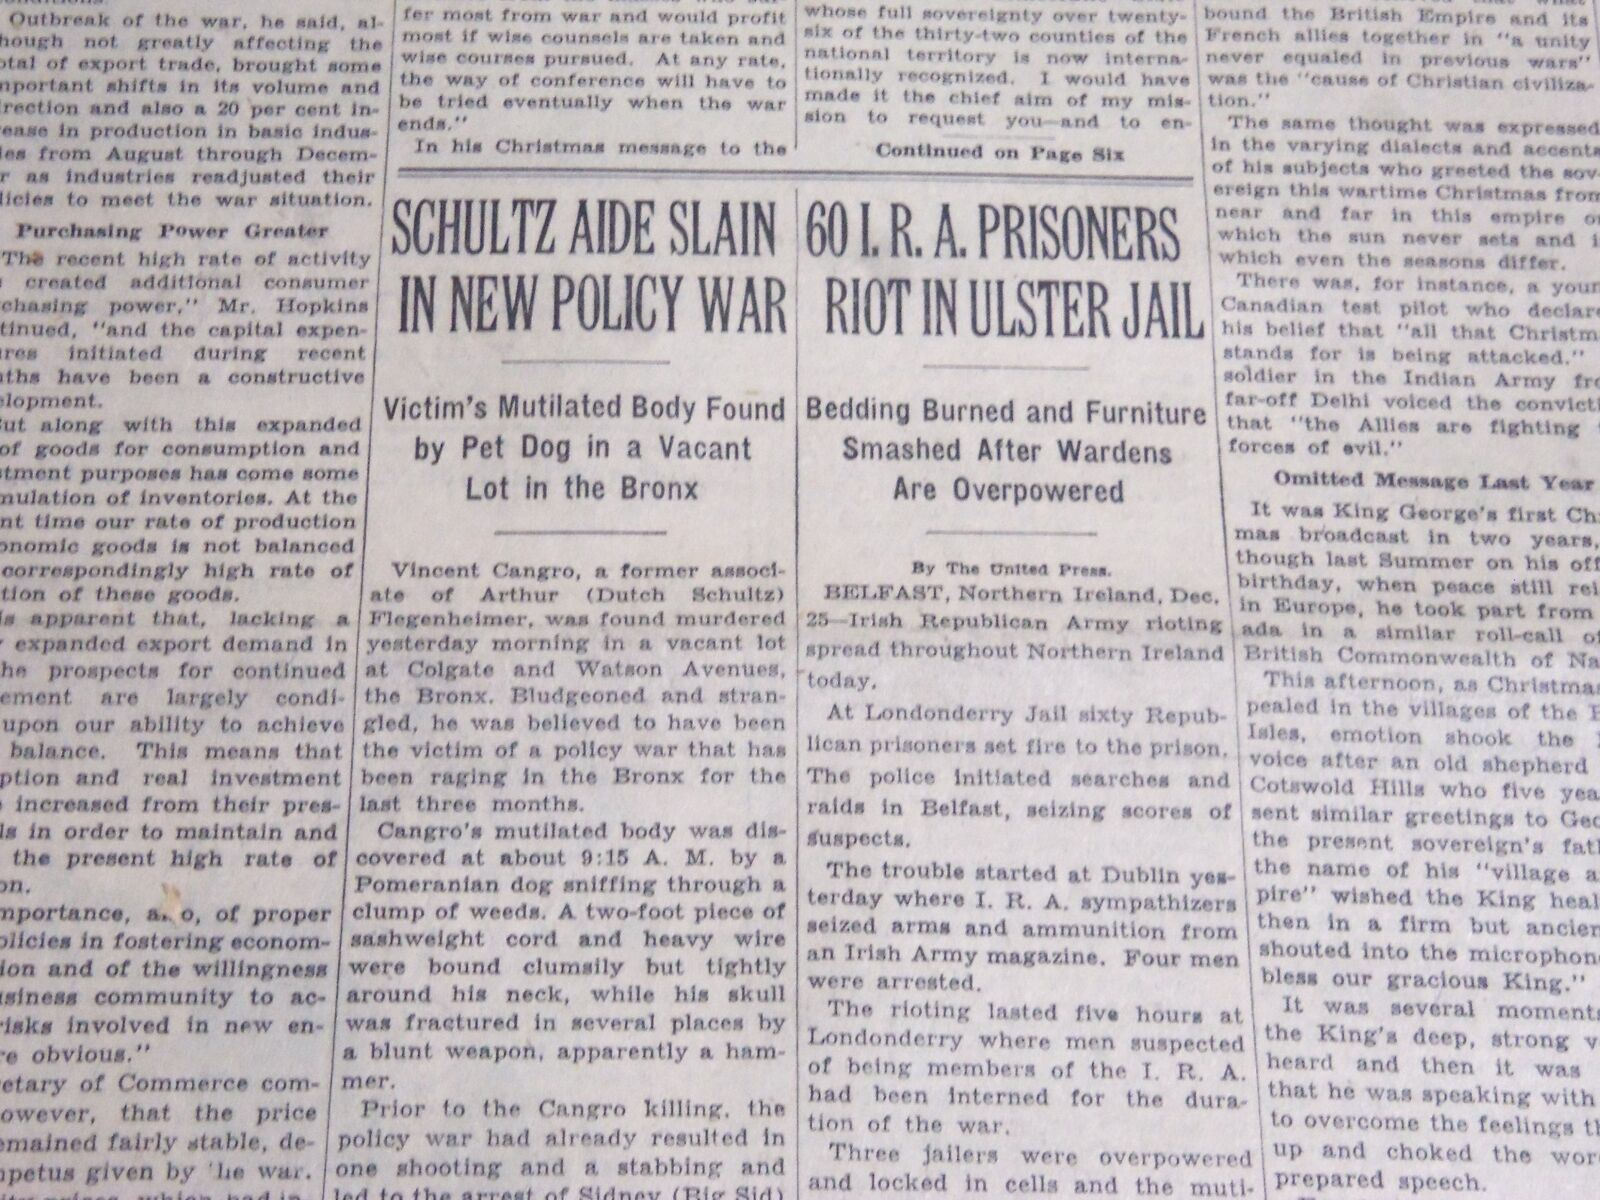 1939 DECEMBER 26 NEW YORK TIMES - SCHULTZ AIDE SLAIN IN NEW POLICY WAR - NT 6830